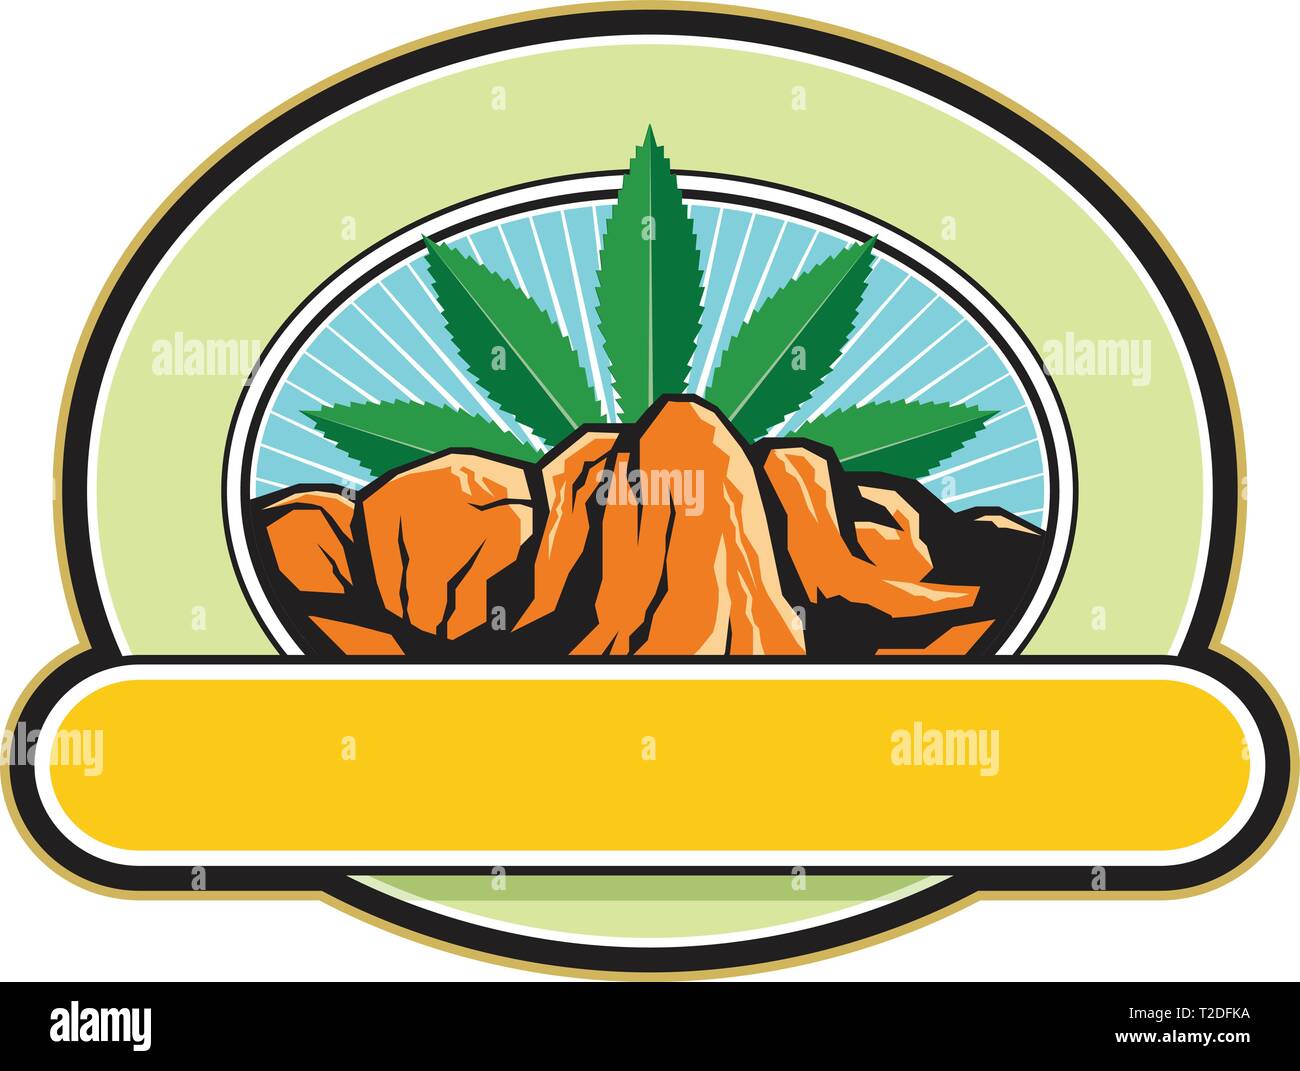 Retro style illustration of a mountain or canyon with steep cliff and hemp leaf in background set inside oval shape with banner in foreground. Stock Vector